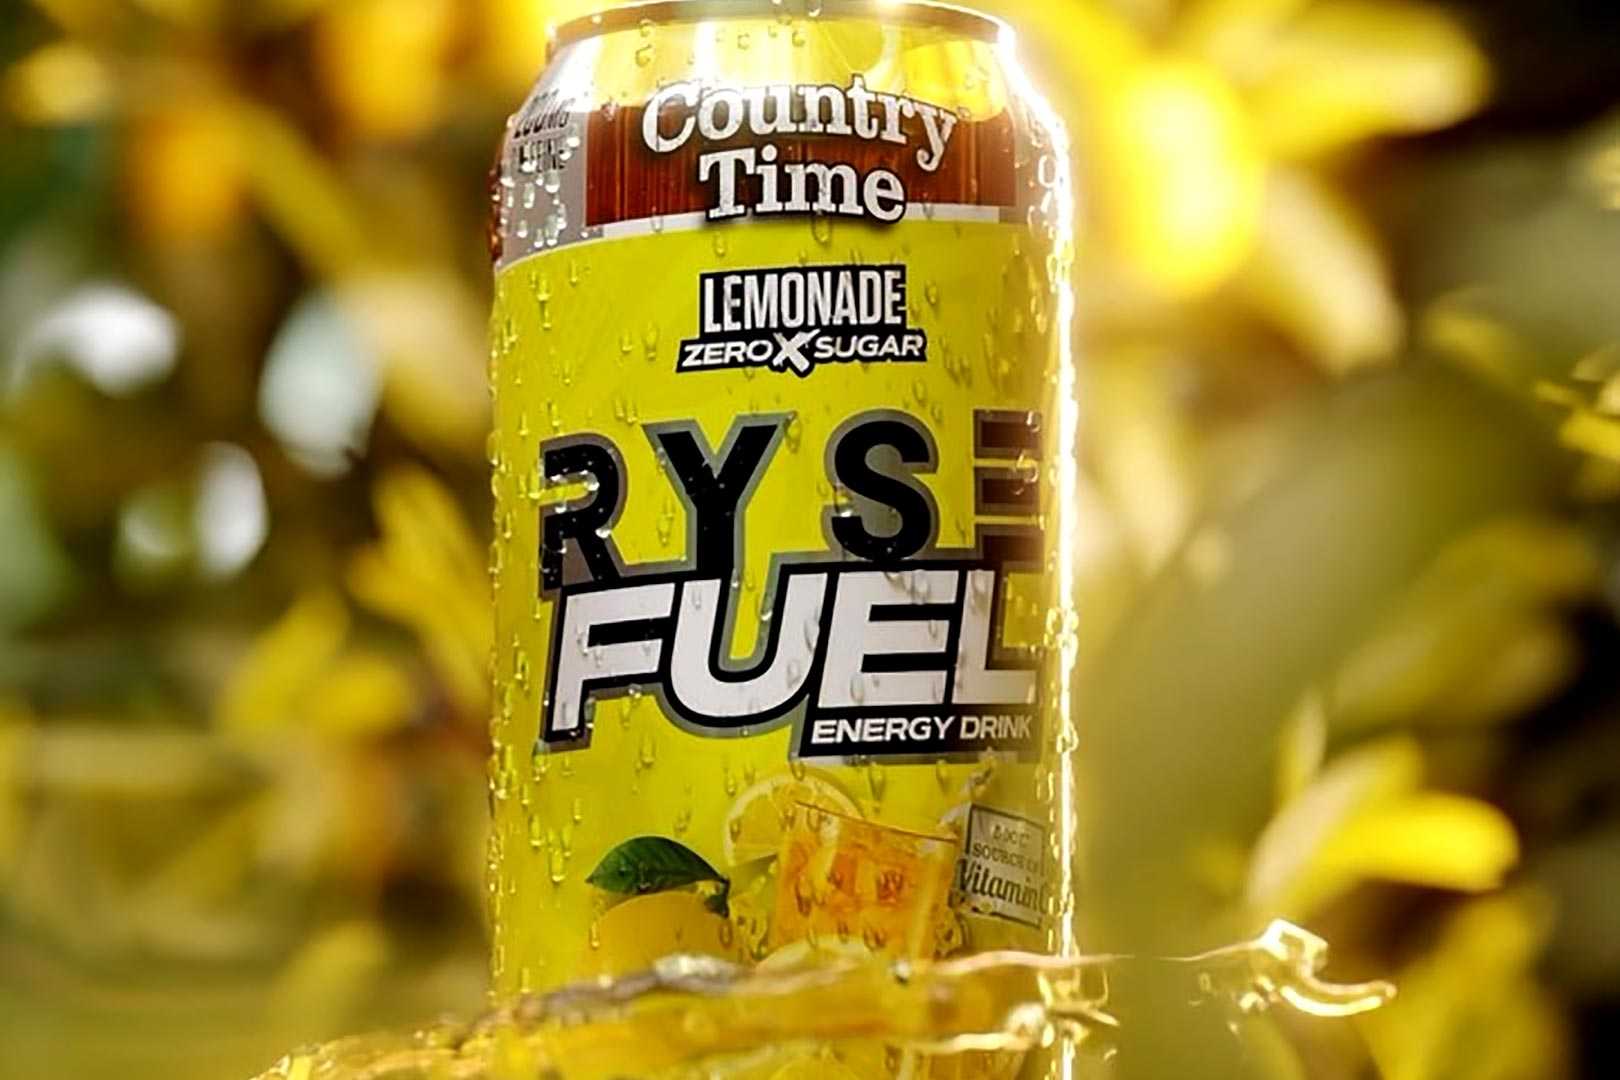 RYSE shares the first look at its authentic Country Time Lemonade energy drink